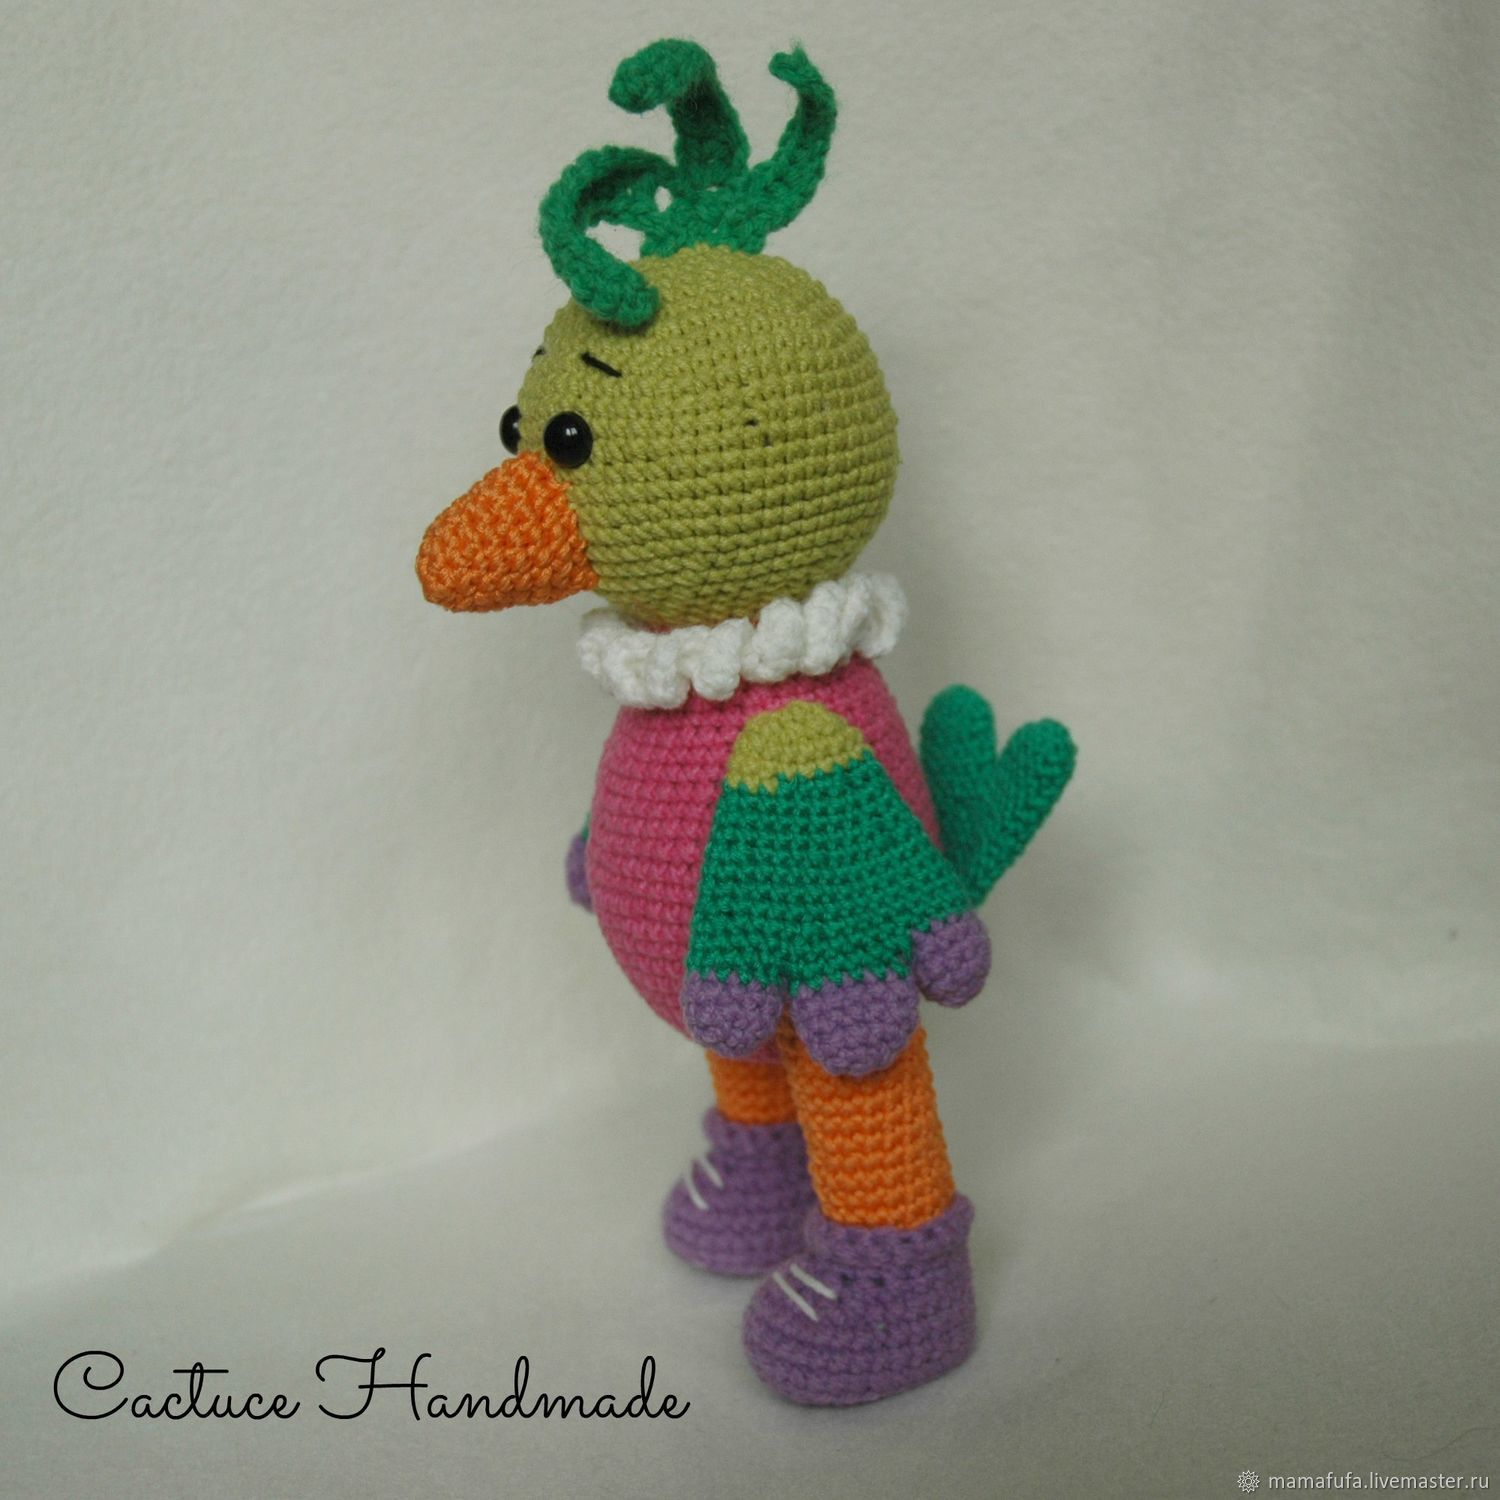 Crochet Parrot Pattern Master Class On Crochet Parrot Shop Online On Livemaster With